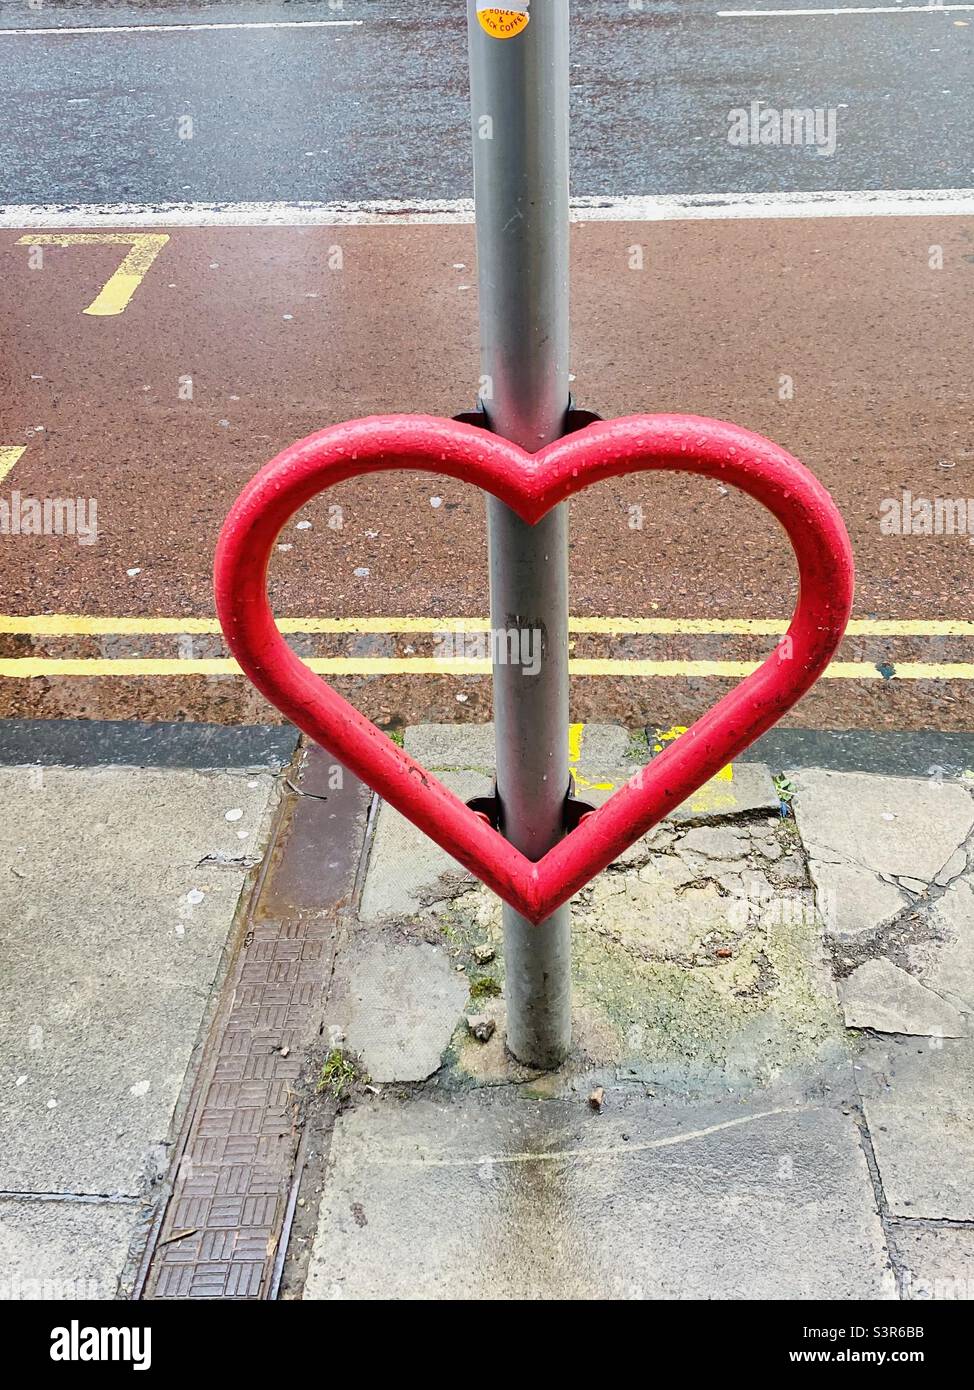 Street art red metal heart on a lamppost in the UK Stock Photo